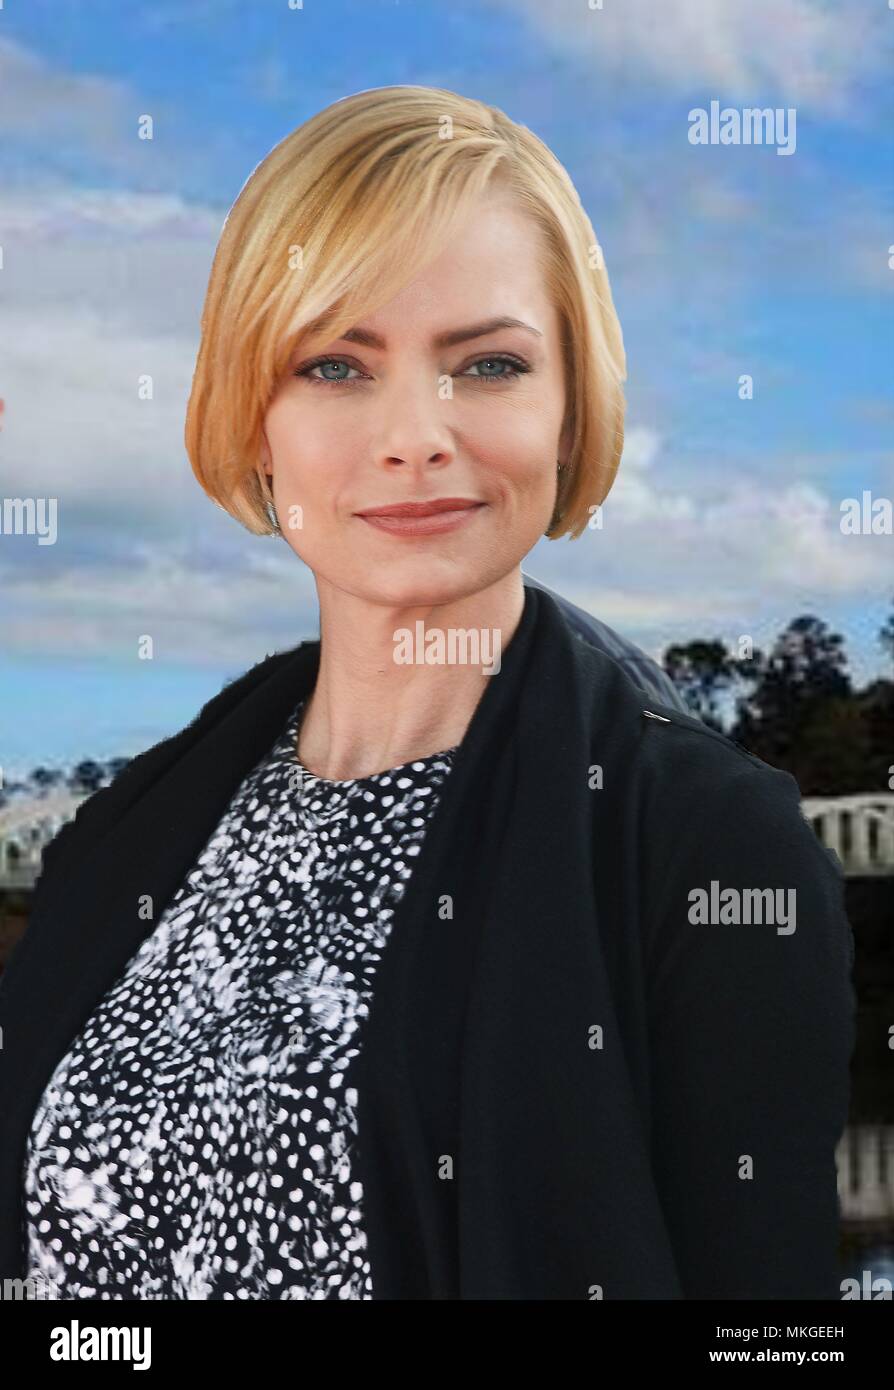 Jaime Pressly 029  Allison Janney honored with a Star on the Hollywood Walk of Fame in Los Angeles. October 17, 2016.Jaime Pressly 029 pe  Event in Hollywood Life - California,  Red Carpet Event, Vertical, USA, Film Industry, Celebrities,  Photography, Bestof, Arts Culture and Entertainment, Topix Celebrities fashion / one person, Vertical, Best of, Hollywood Life, Event in Hollywood Life - California,  Red Carpet and backstage, USA, Film Industry, Celebrities,  movie celebrities, TV celebrities, Music celebrities, Photography, Bestof, Arts Culture and Entertainment,  Topix, headshot, vertical Stock Photo